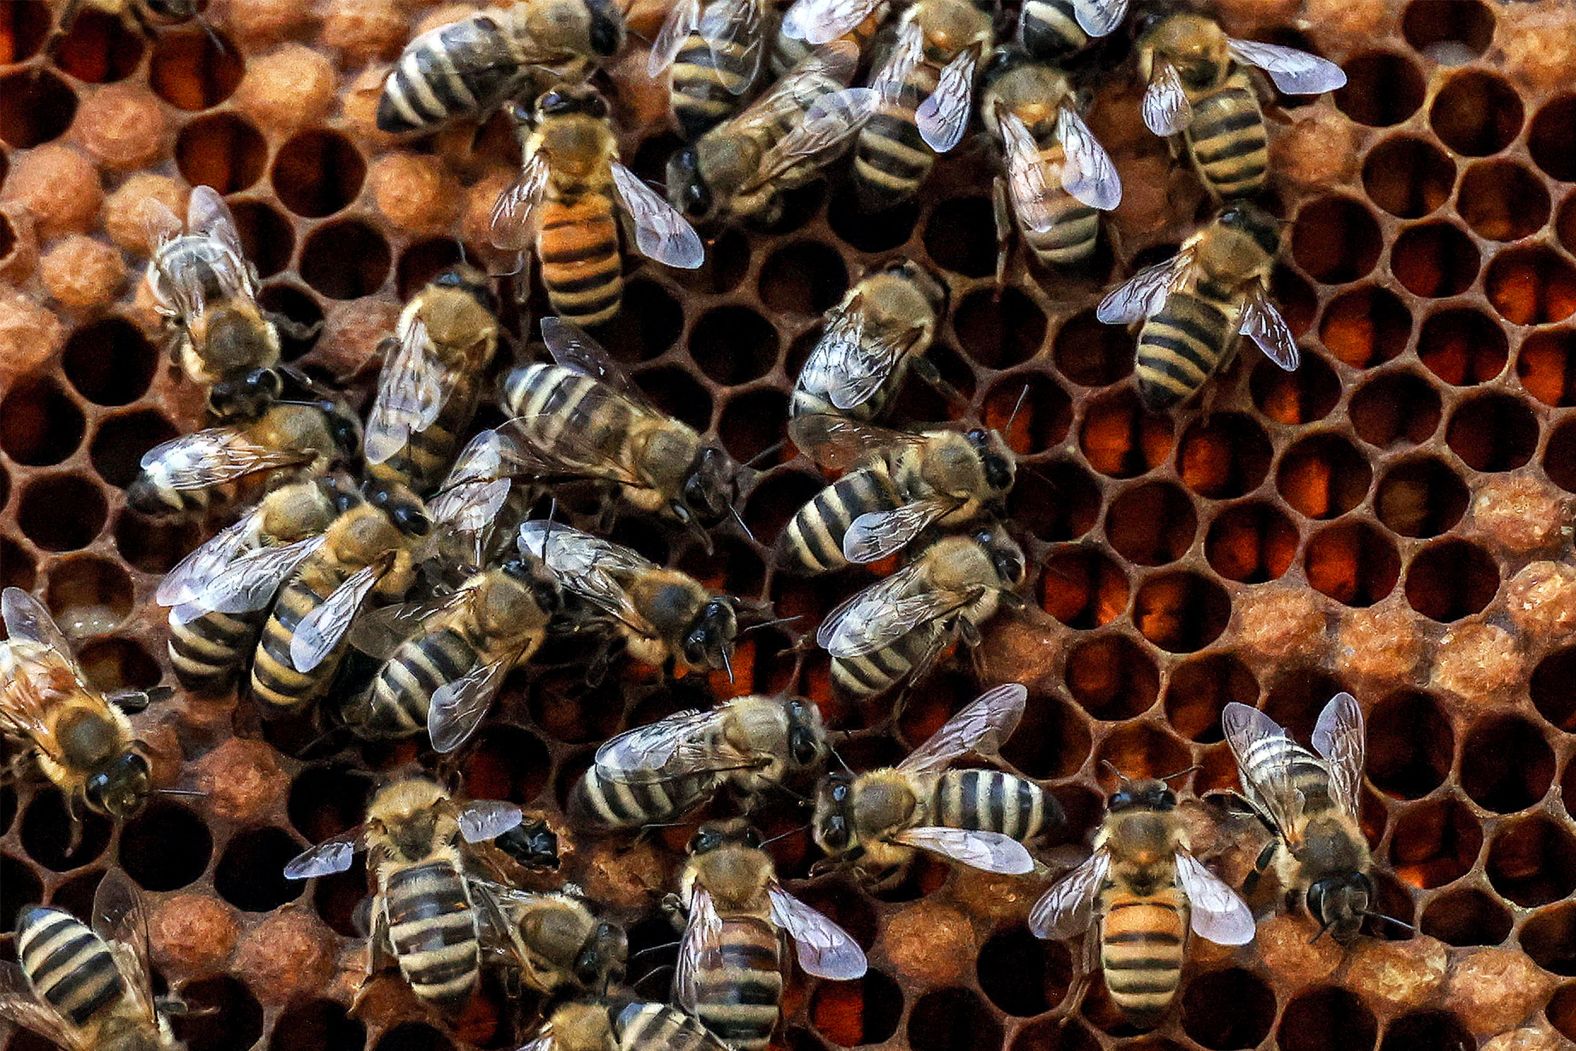 Worker bees swarm outside a hive at an apiary in Kuwait City on Monday, February 5.